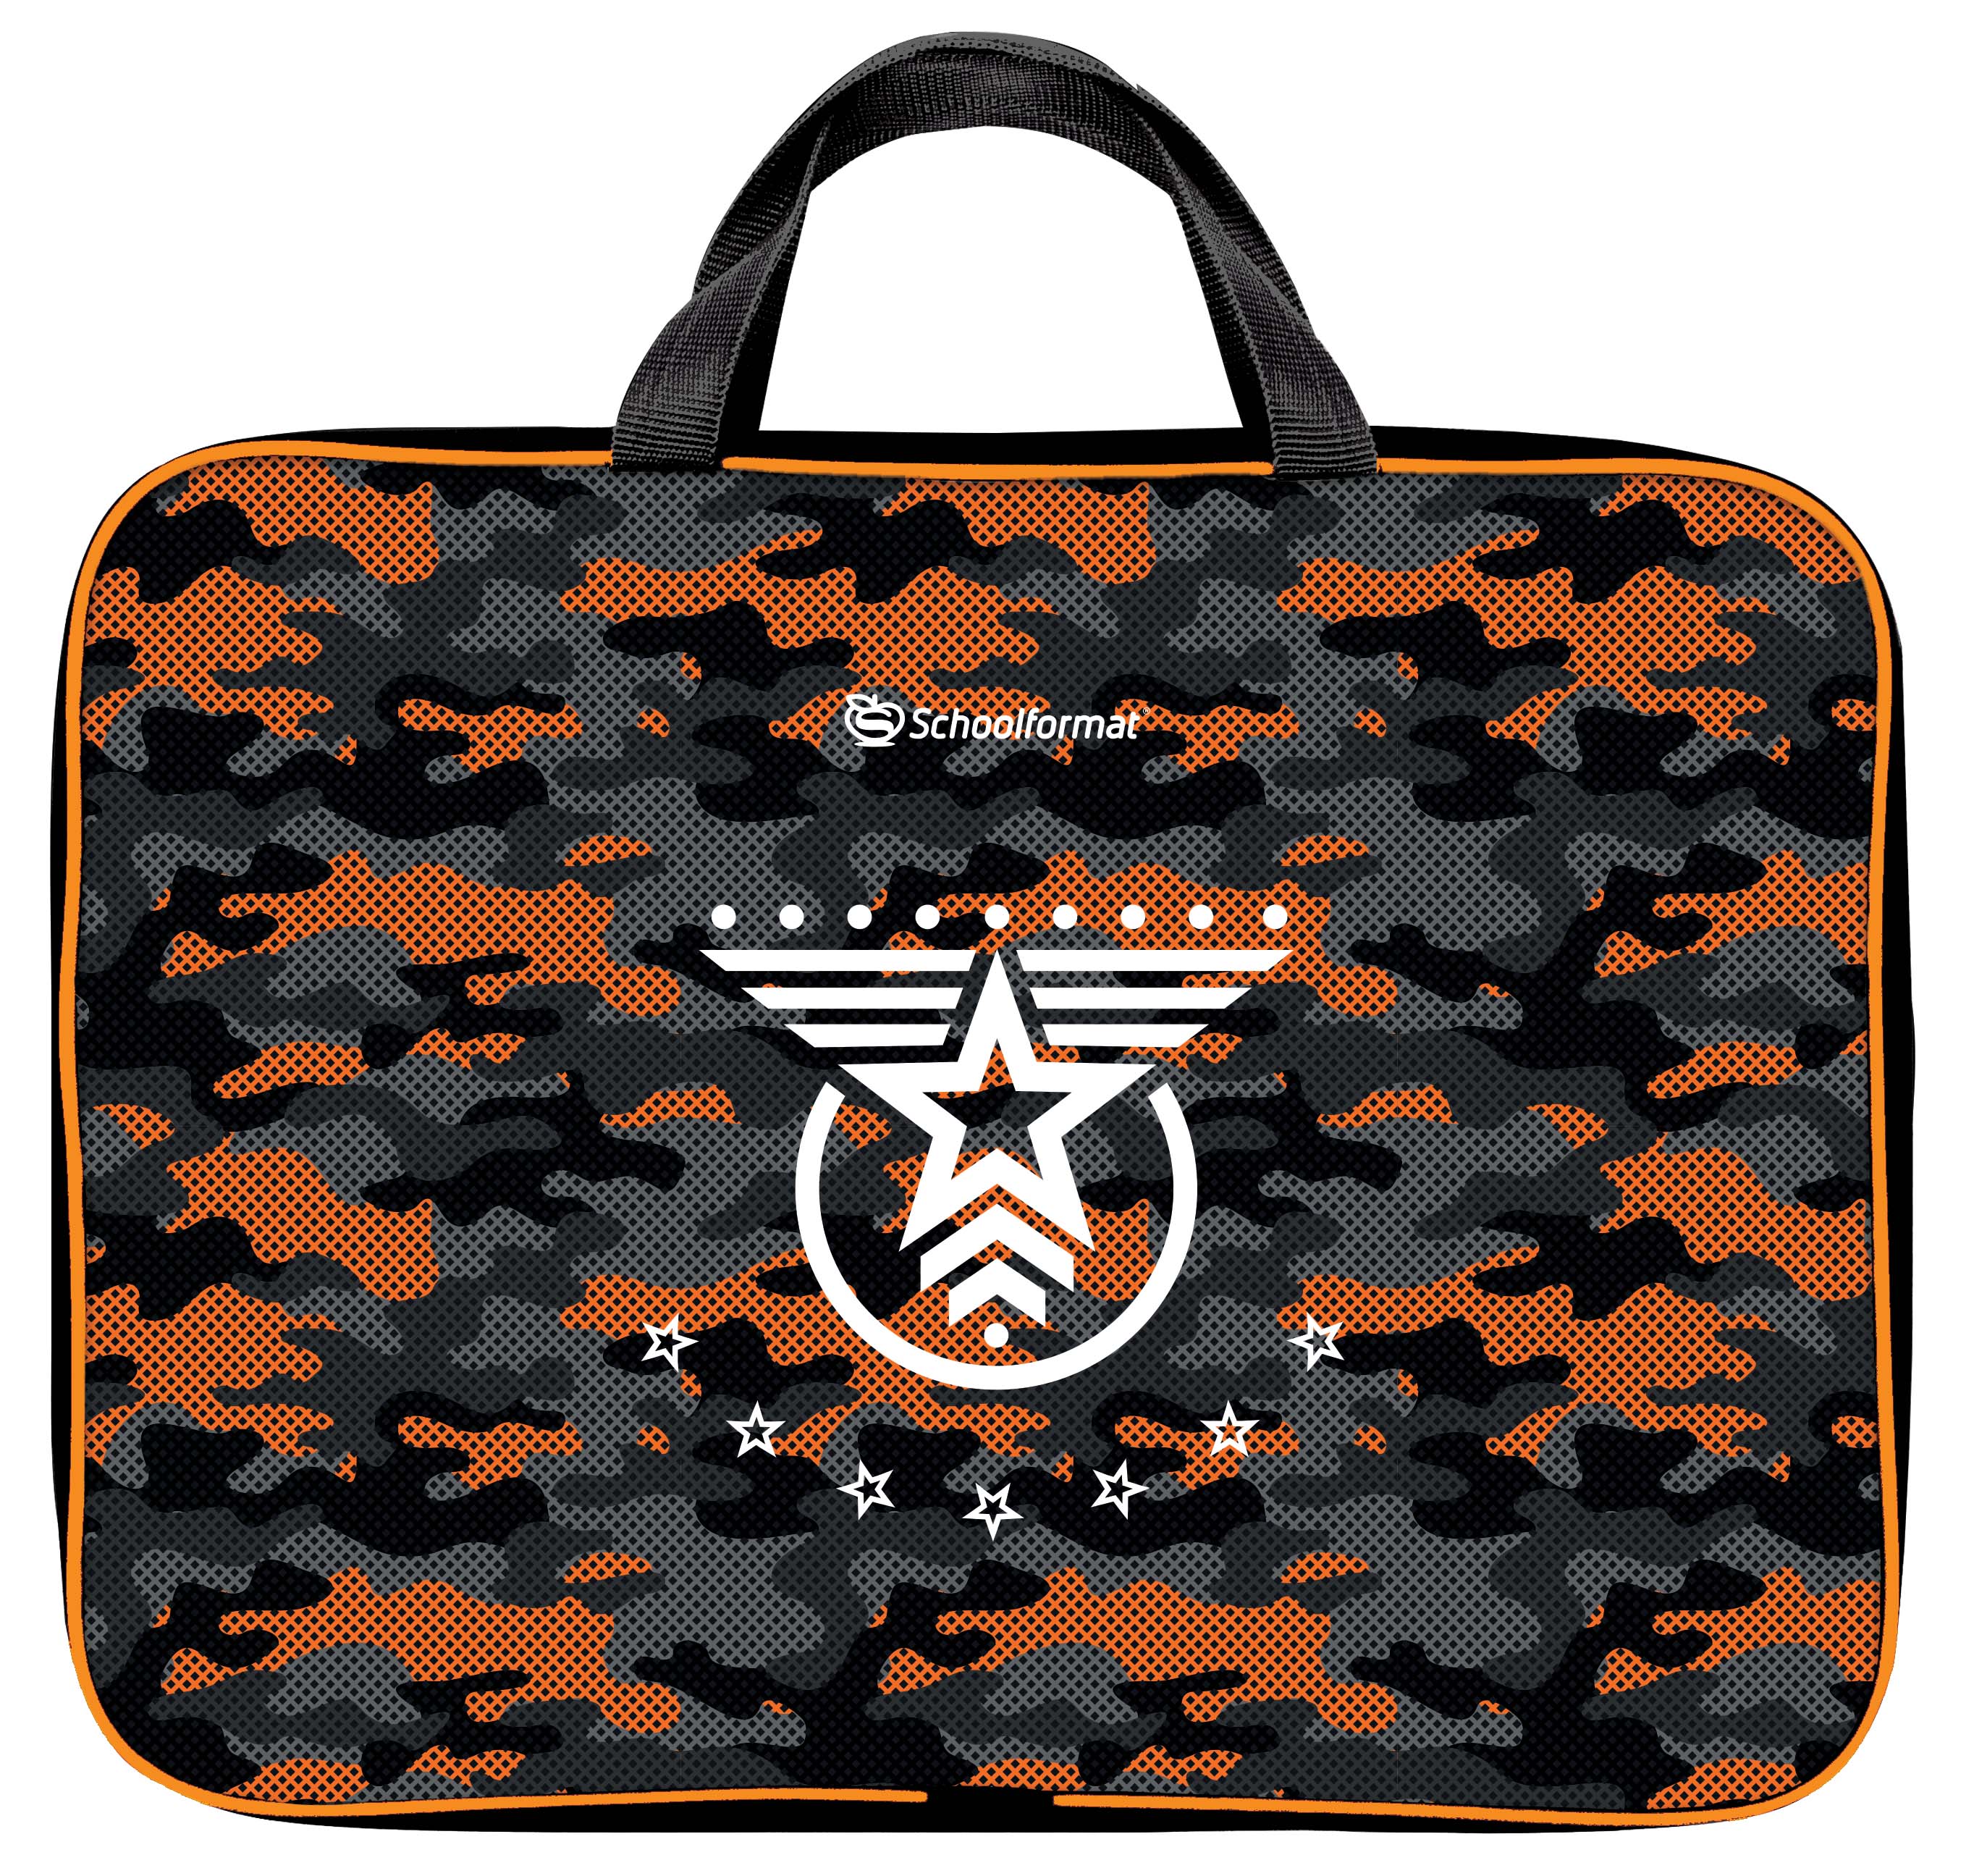     2  4  Schoolformat  MILITARY STYLE 35026560      / 